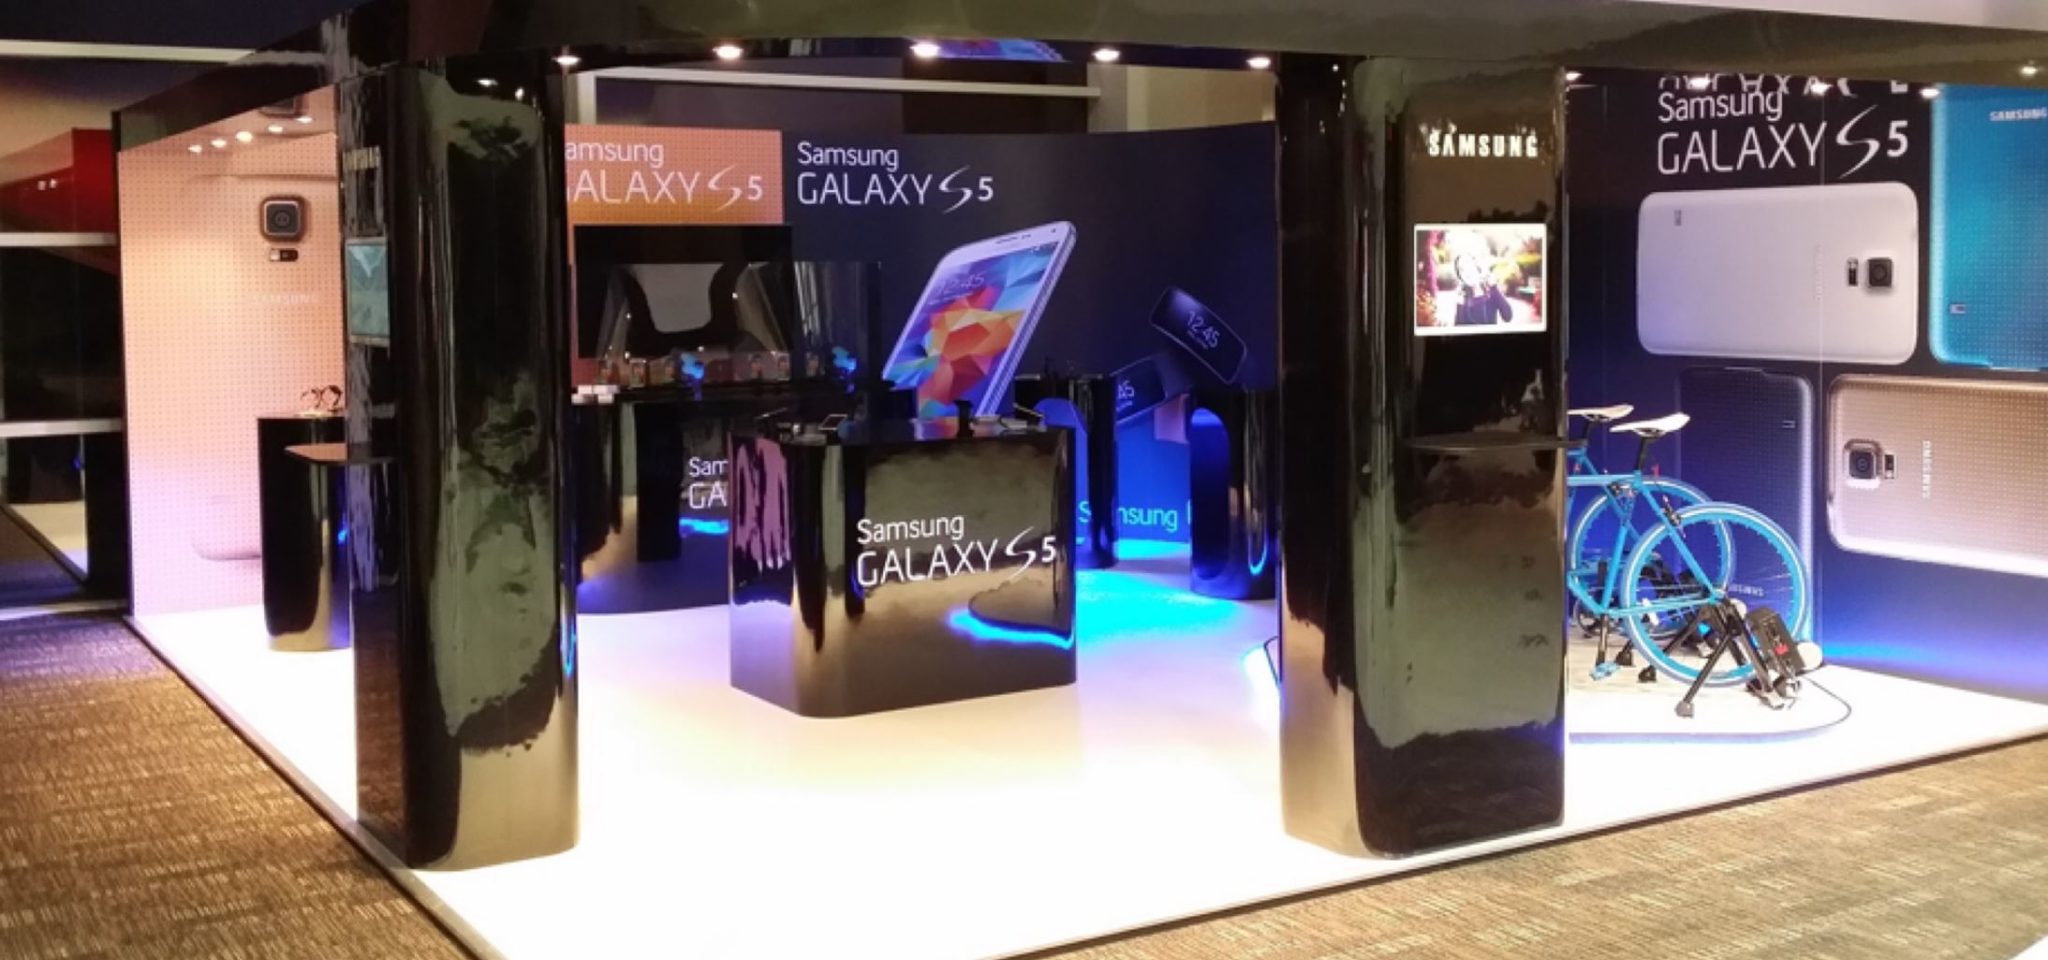 A setup of phones and bikes with blue lighting promoting Samsung